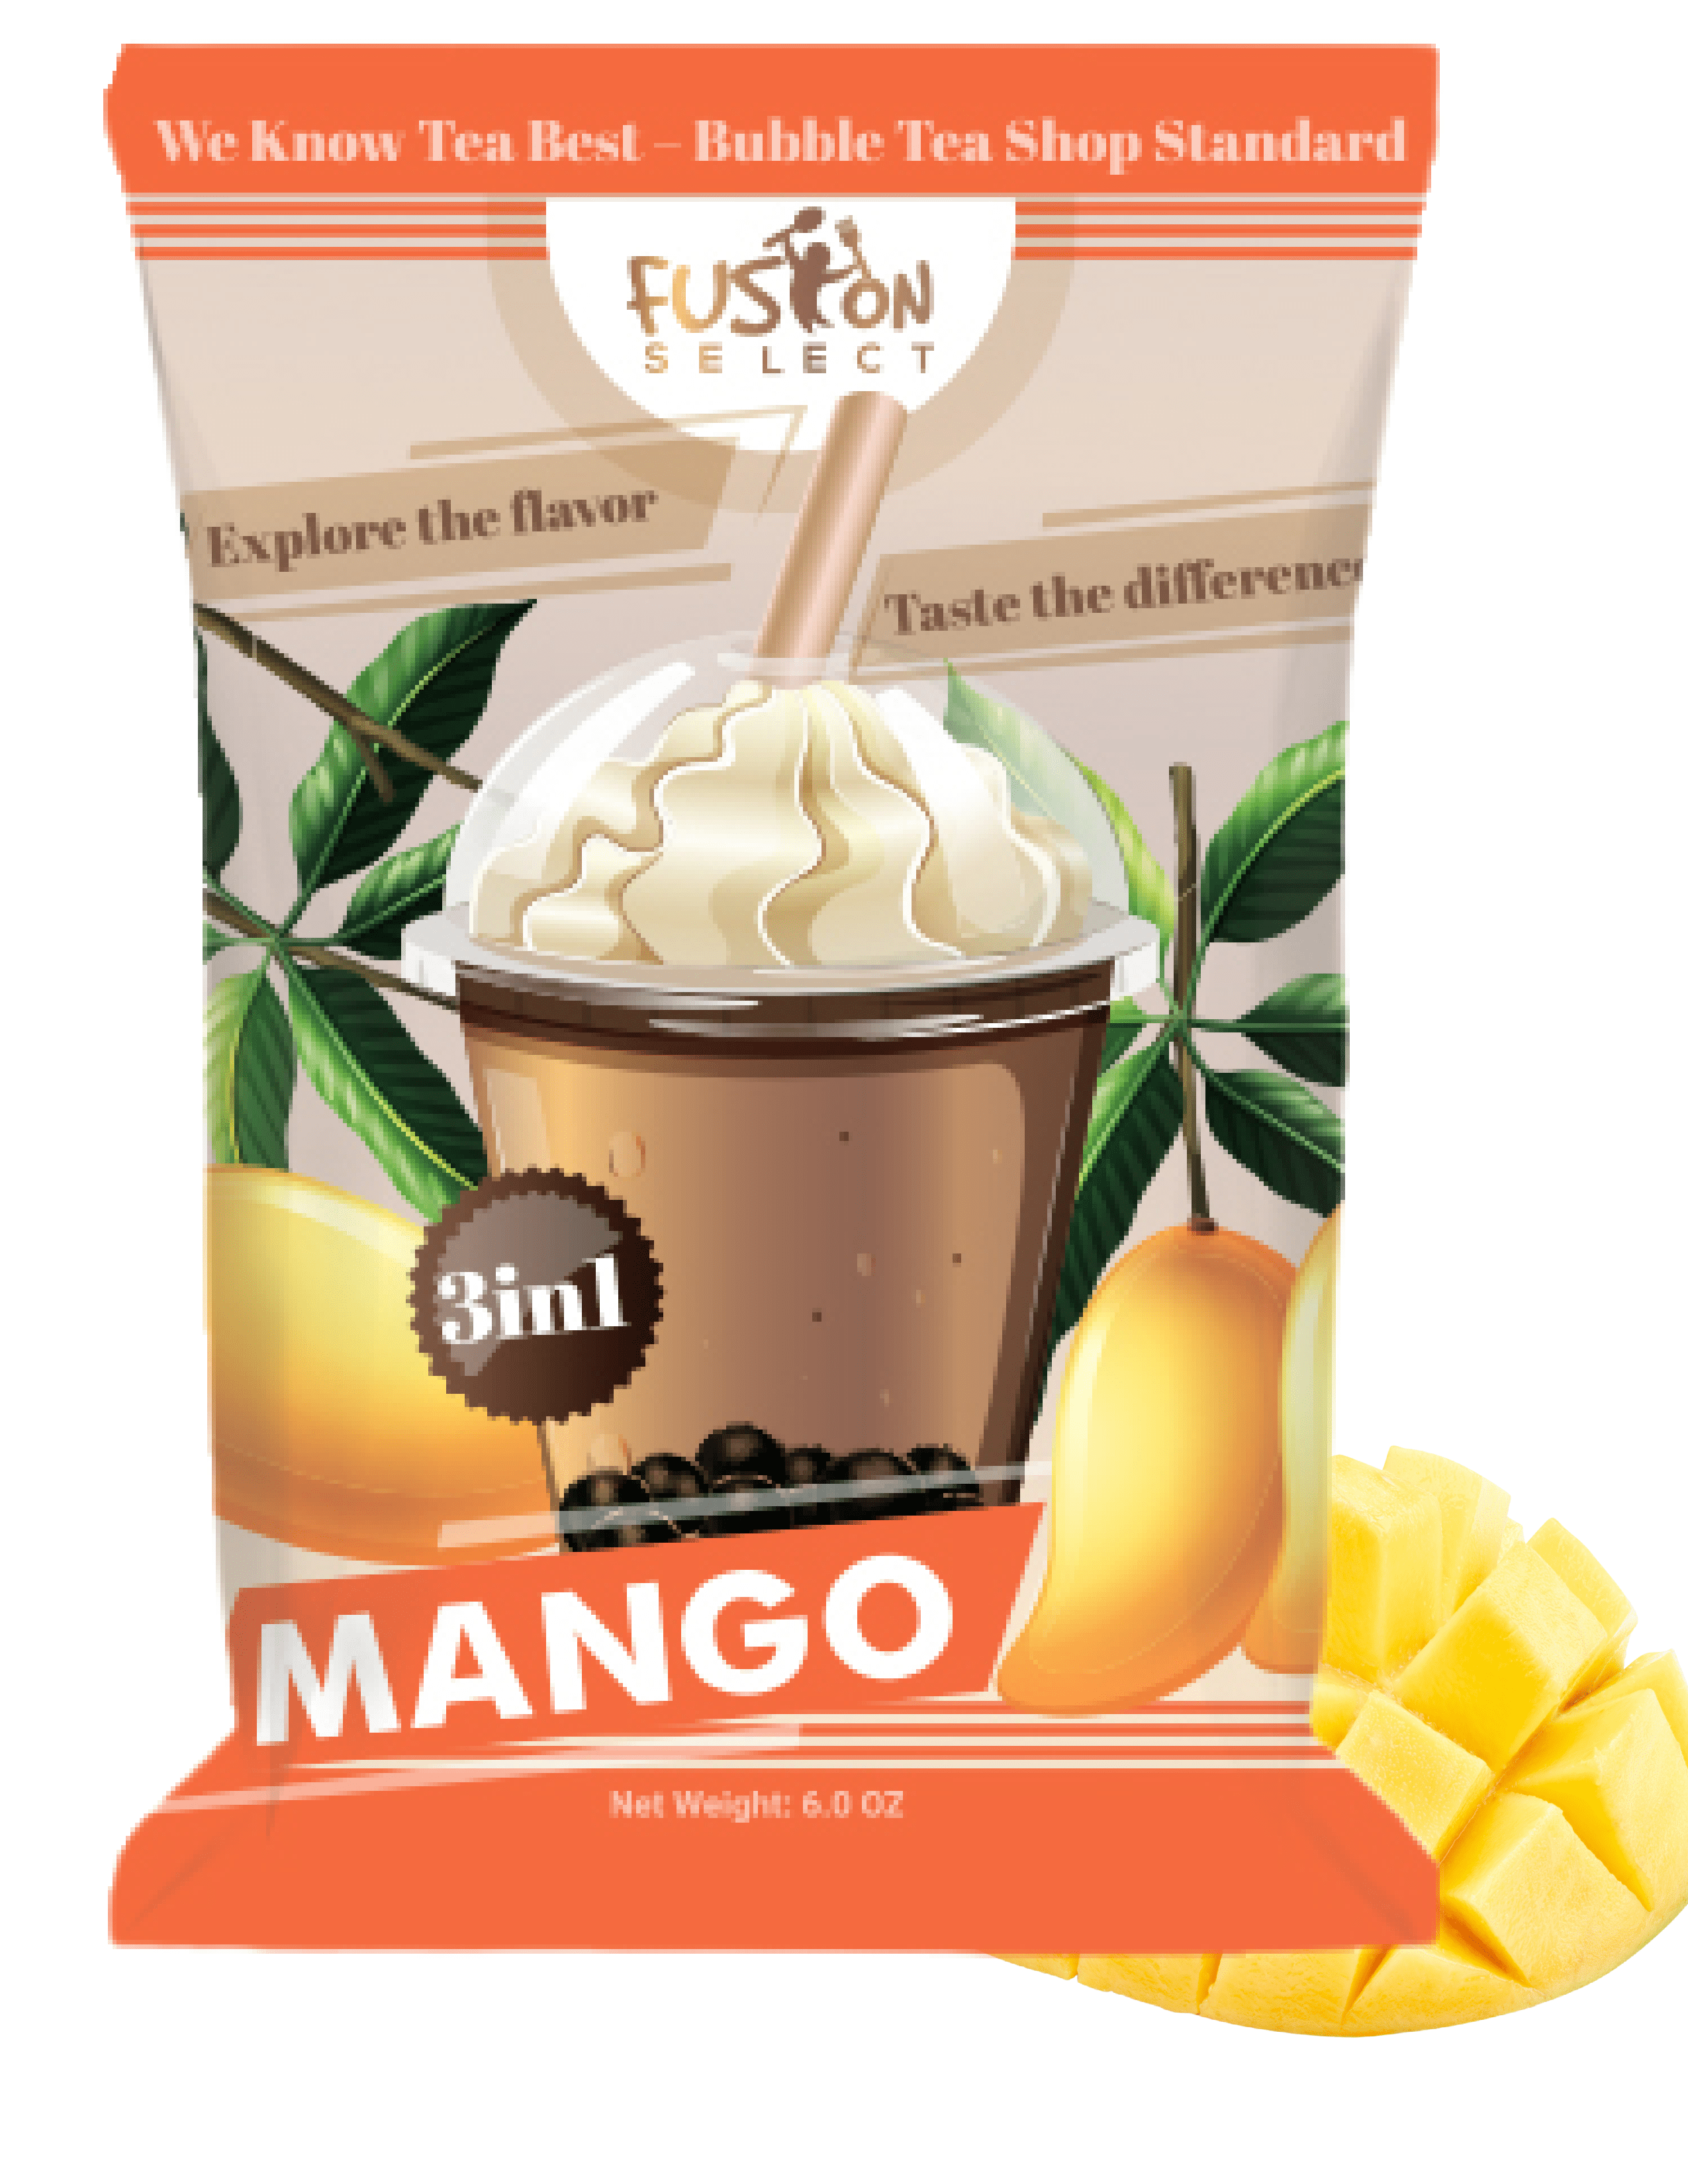 Select Bubble Mix - Mango Flavored 3-in-1 Powder with Cream Sugar - Instant Pre-Mixed Beverage for Hot or Cold Blends & Yummy Frappes - 6 oz. Pack, Made